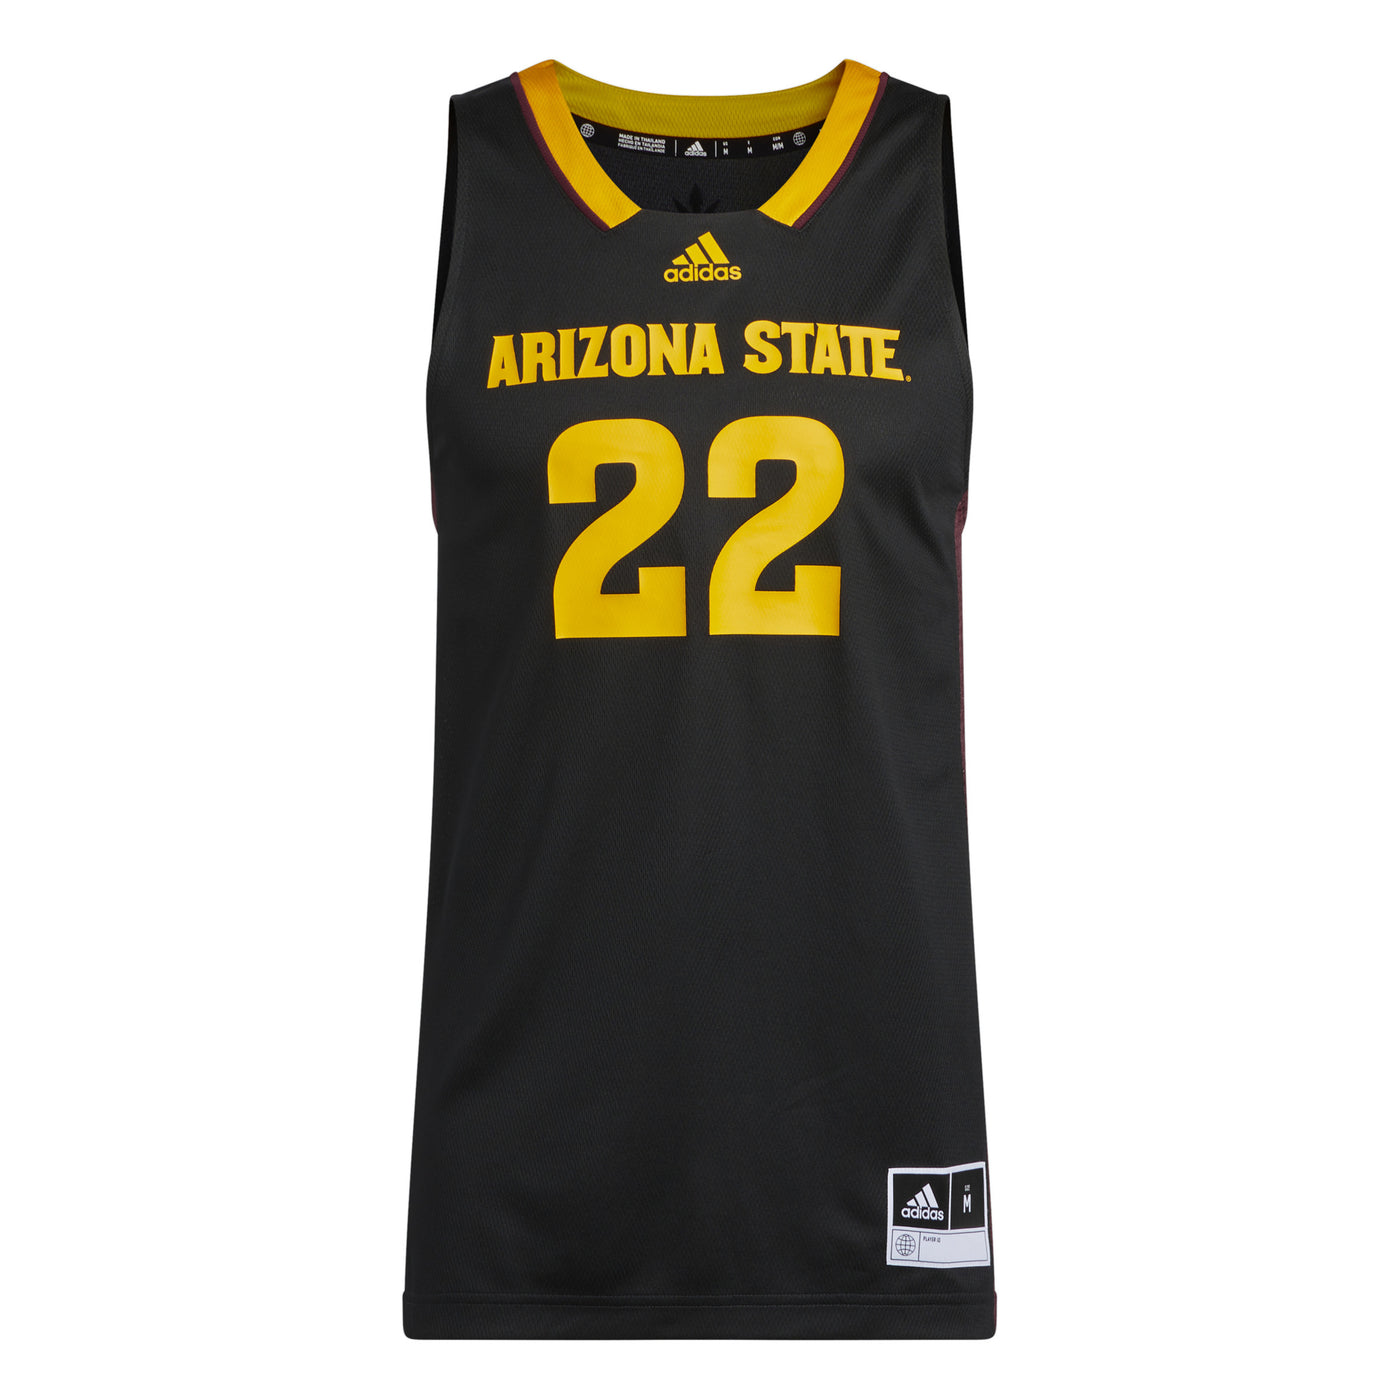 ASU black Adidas basketball jersey with 'Arizona State' letters above '22' and gold features